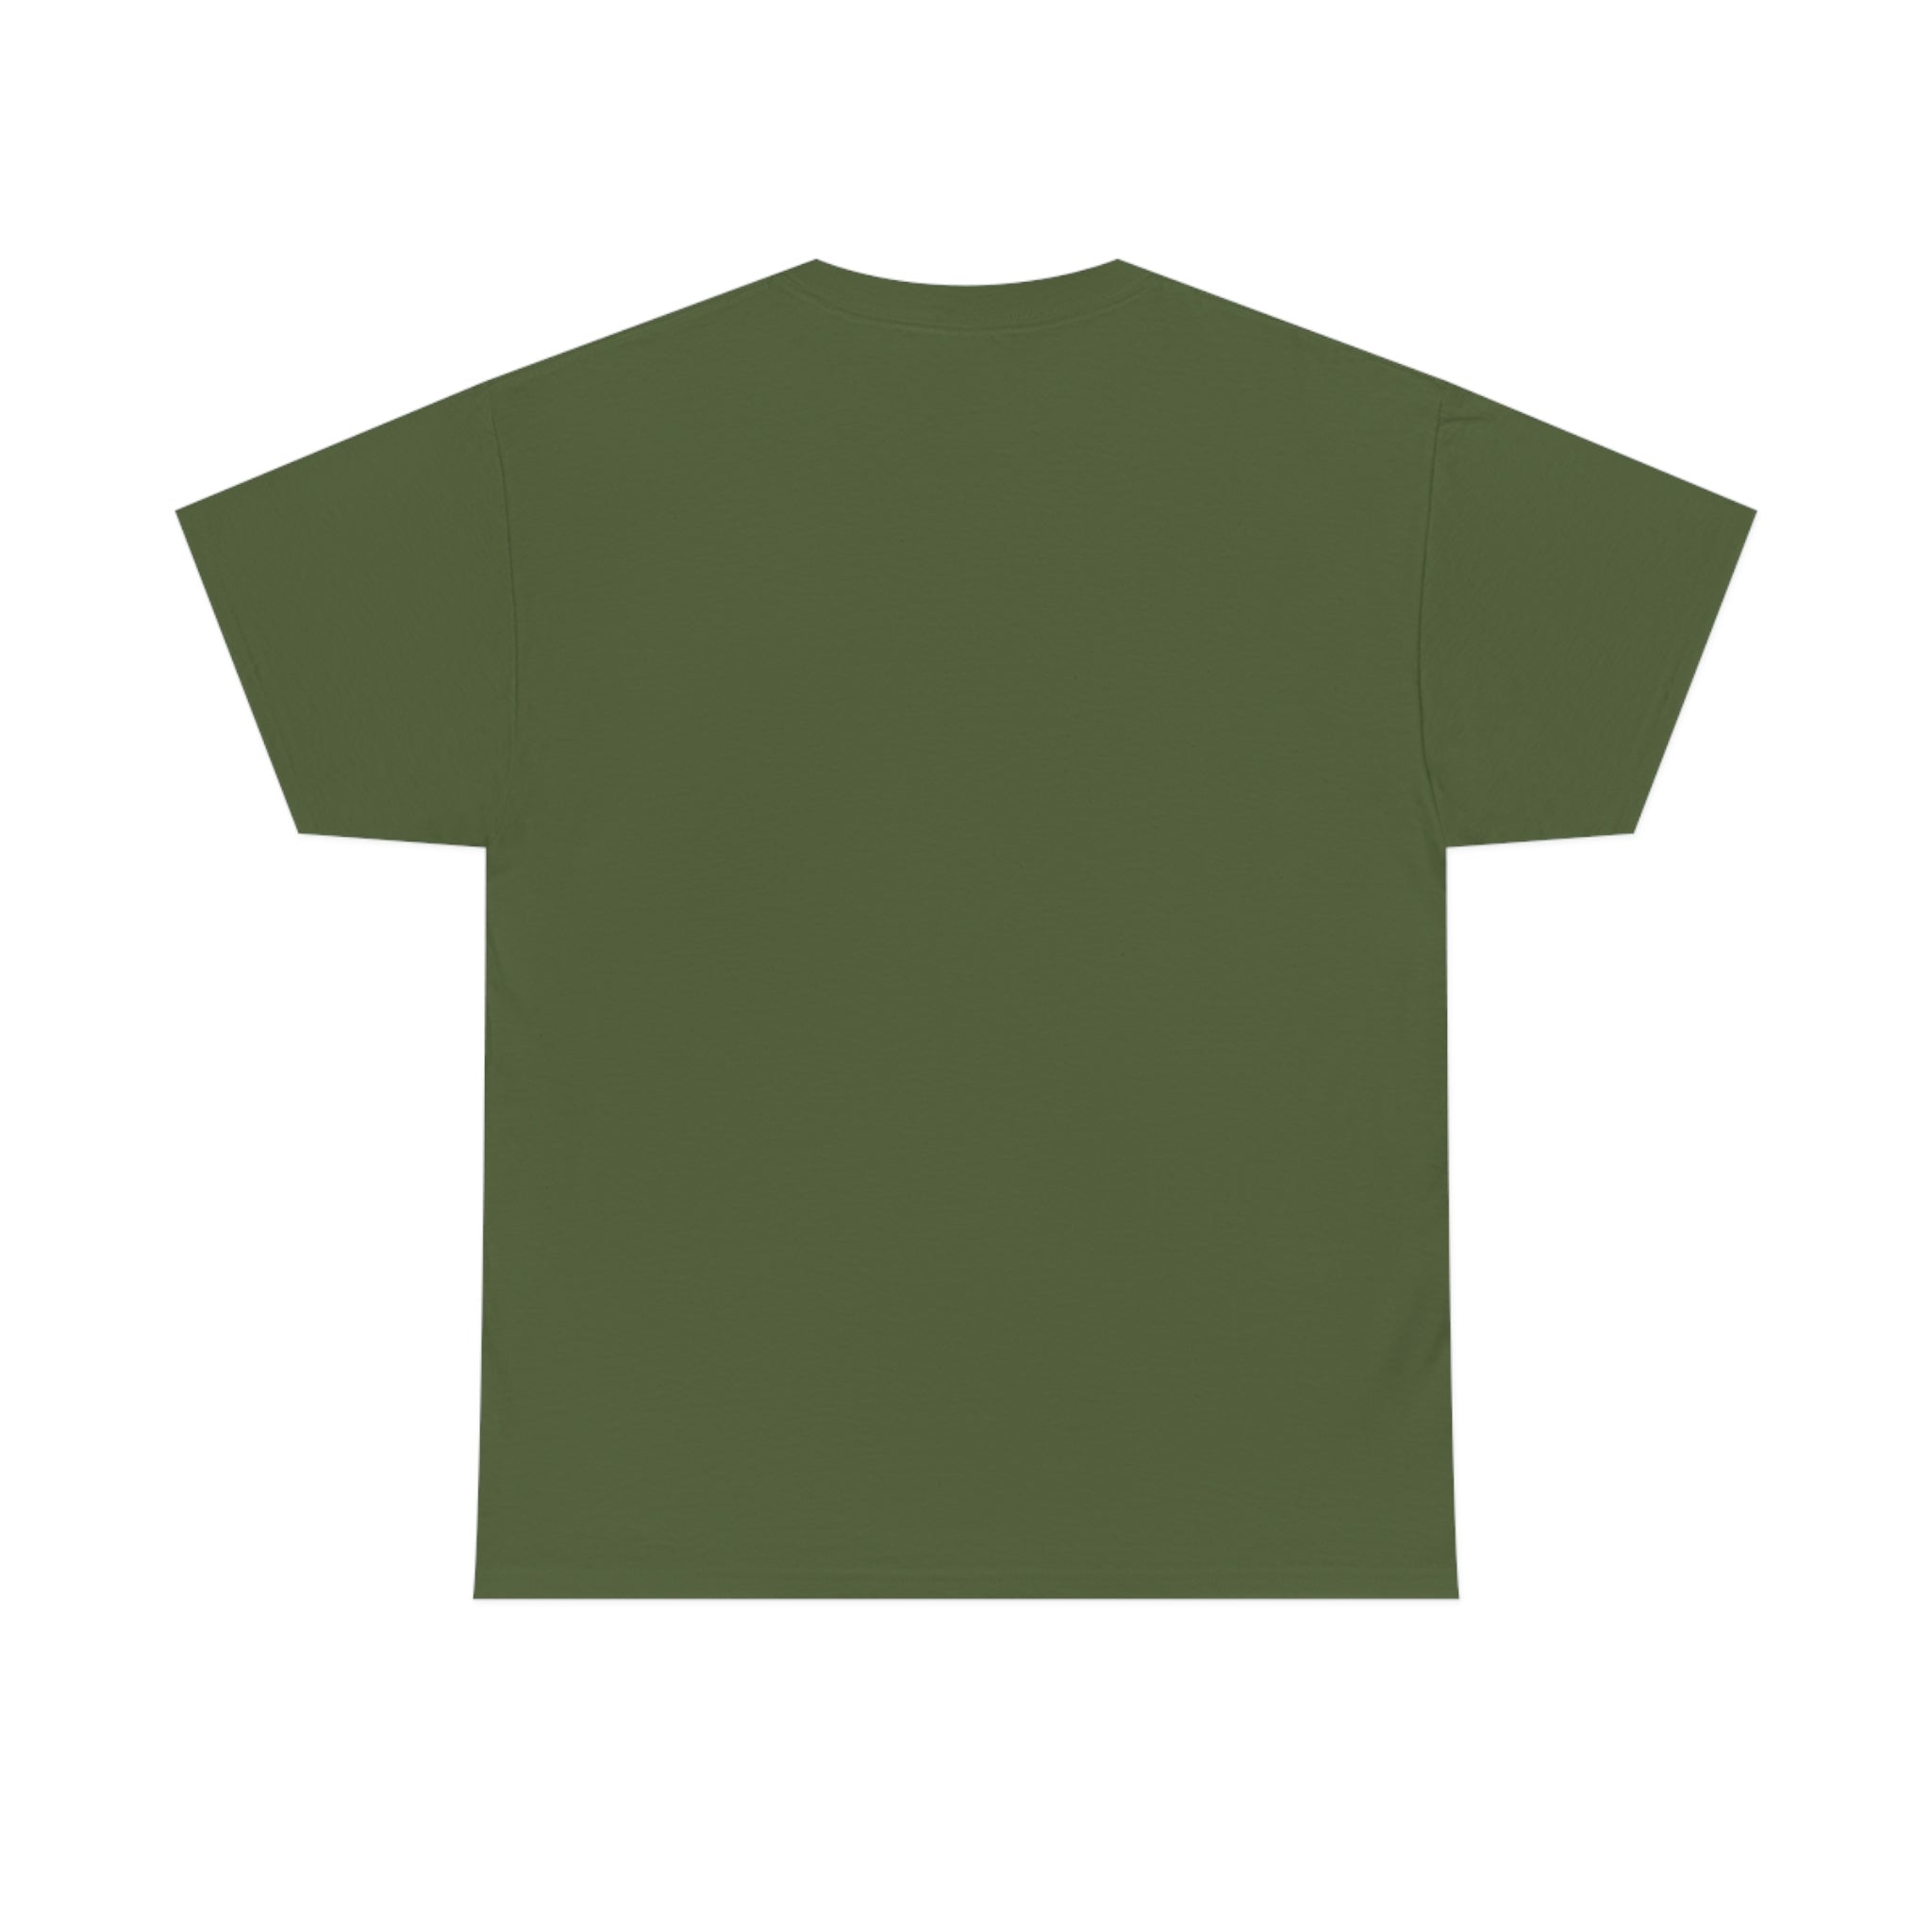 They Conspire and We Aspire Heavy T - Military Green